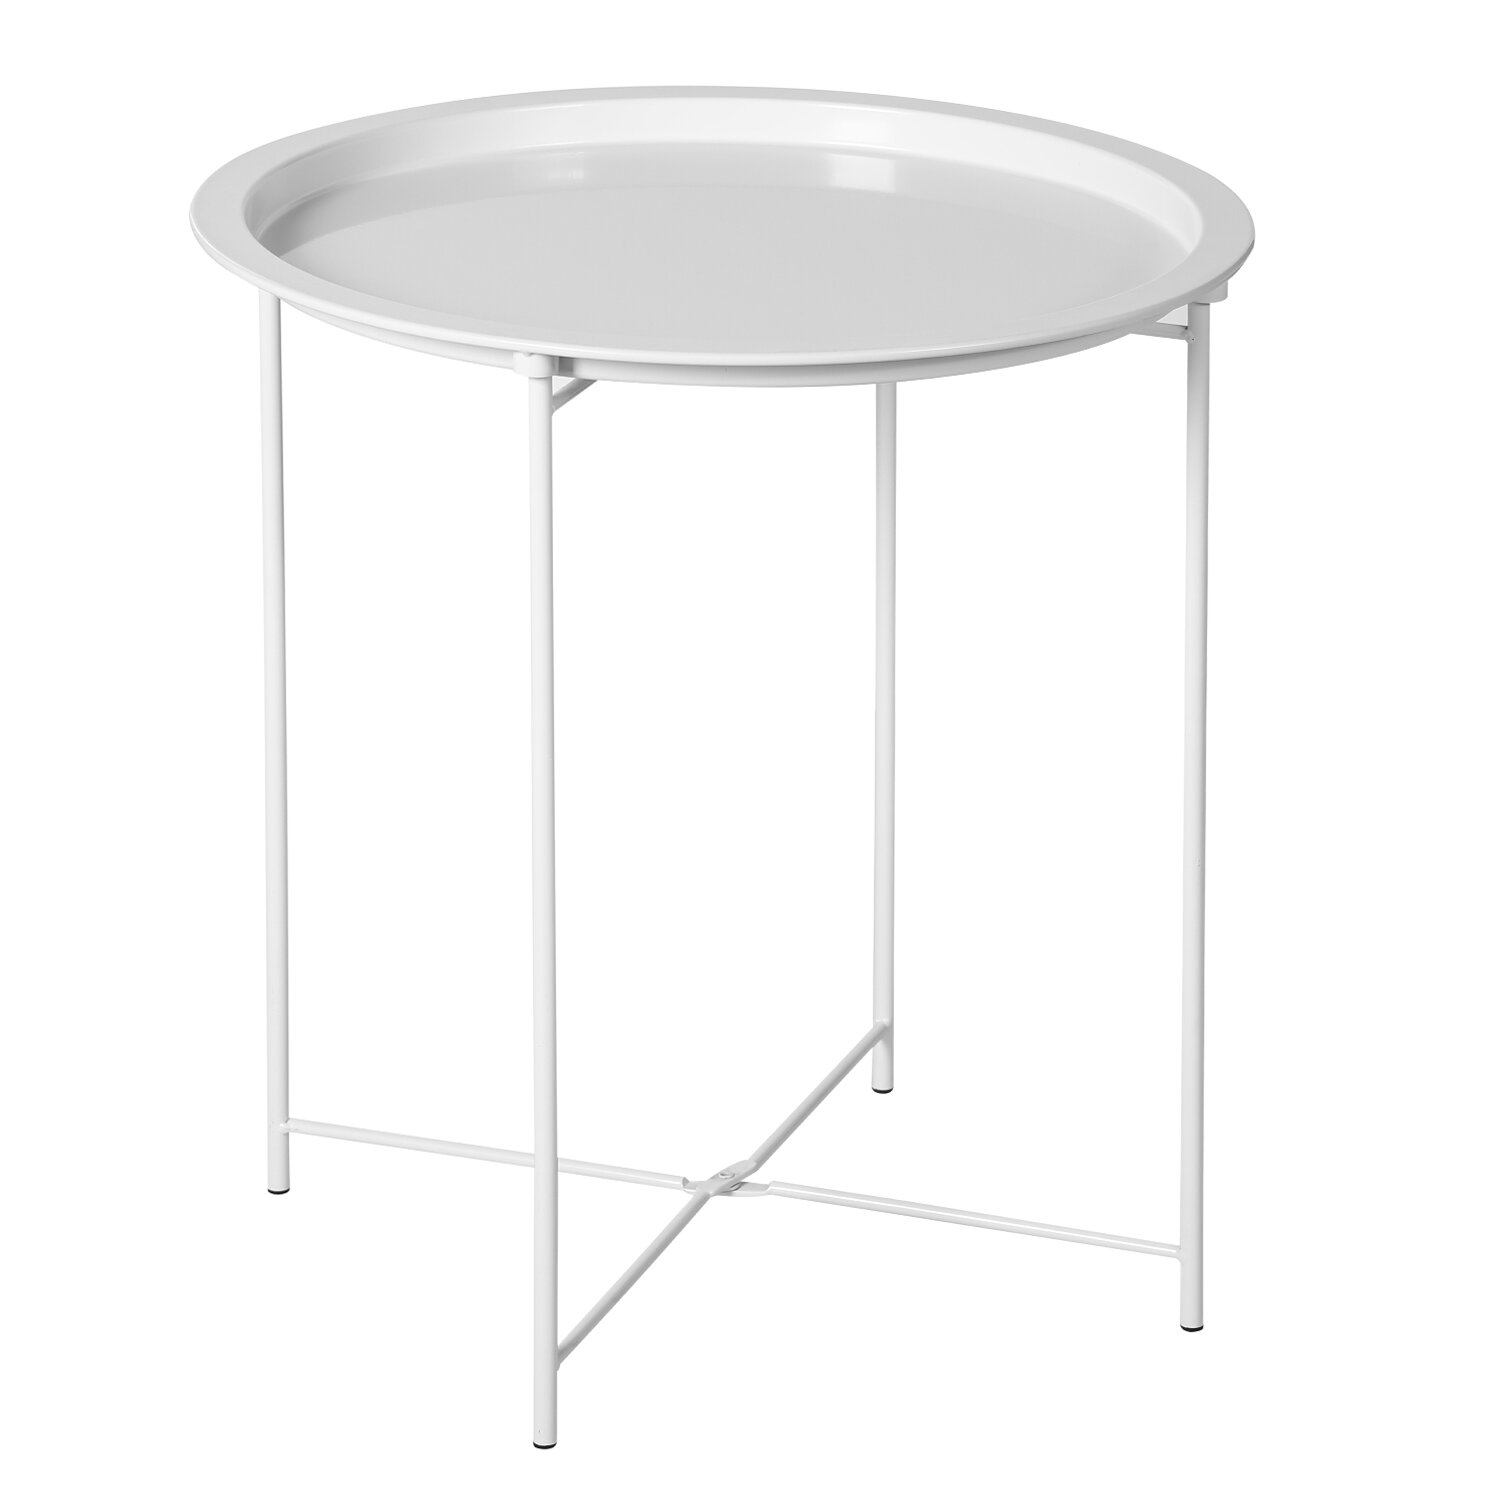 Annalei Tray Top Cross Legs End Table, Multi-use: Small Round Side End Table, Sofa Table, Tray Side Table, Snack Table, Metal, Anti-Rusty, Outdoor and Indoor Use for Putting Small Things., T - image 1 of 2